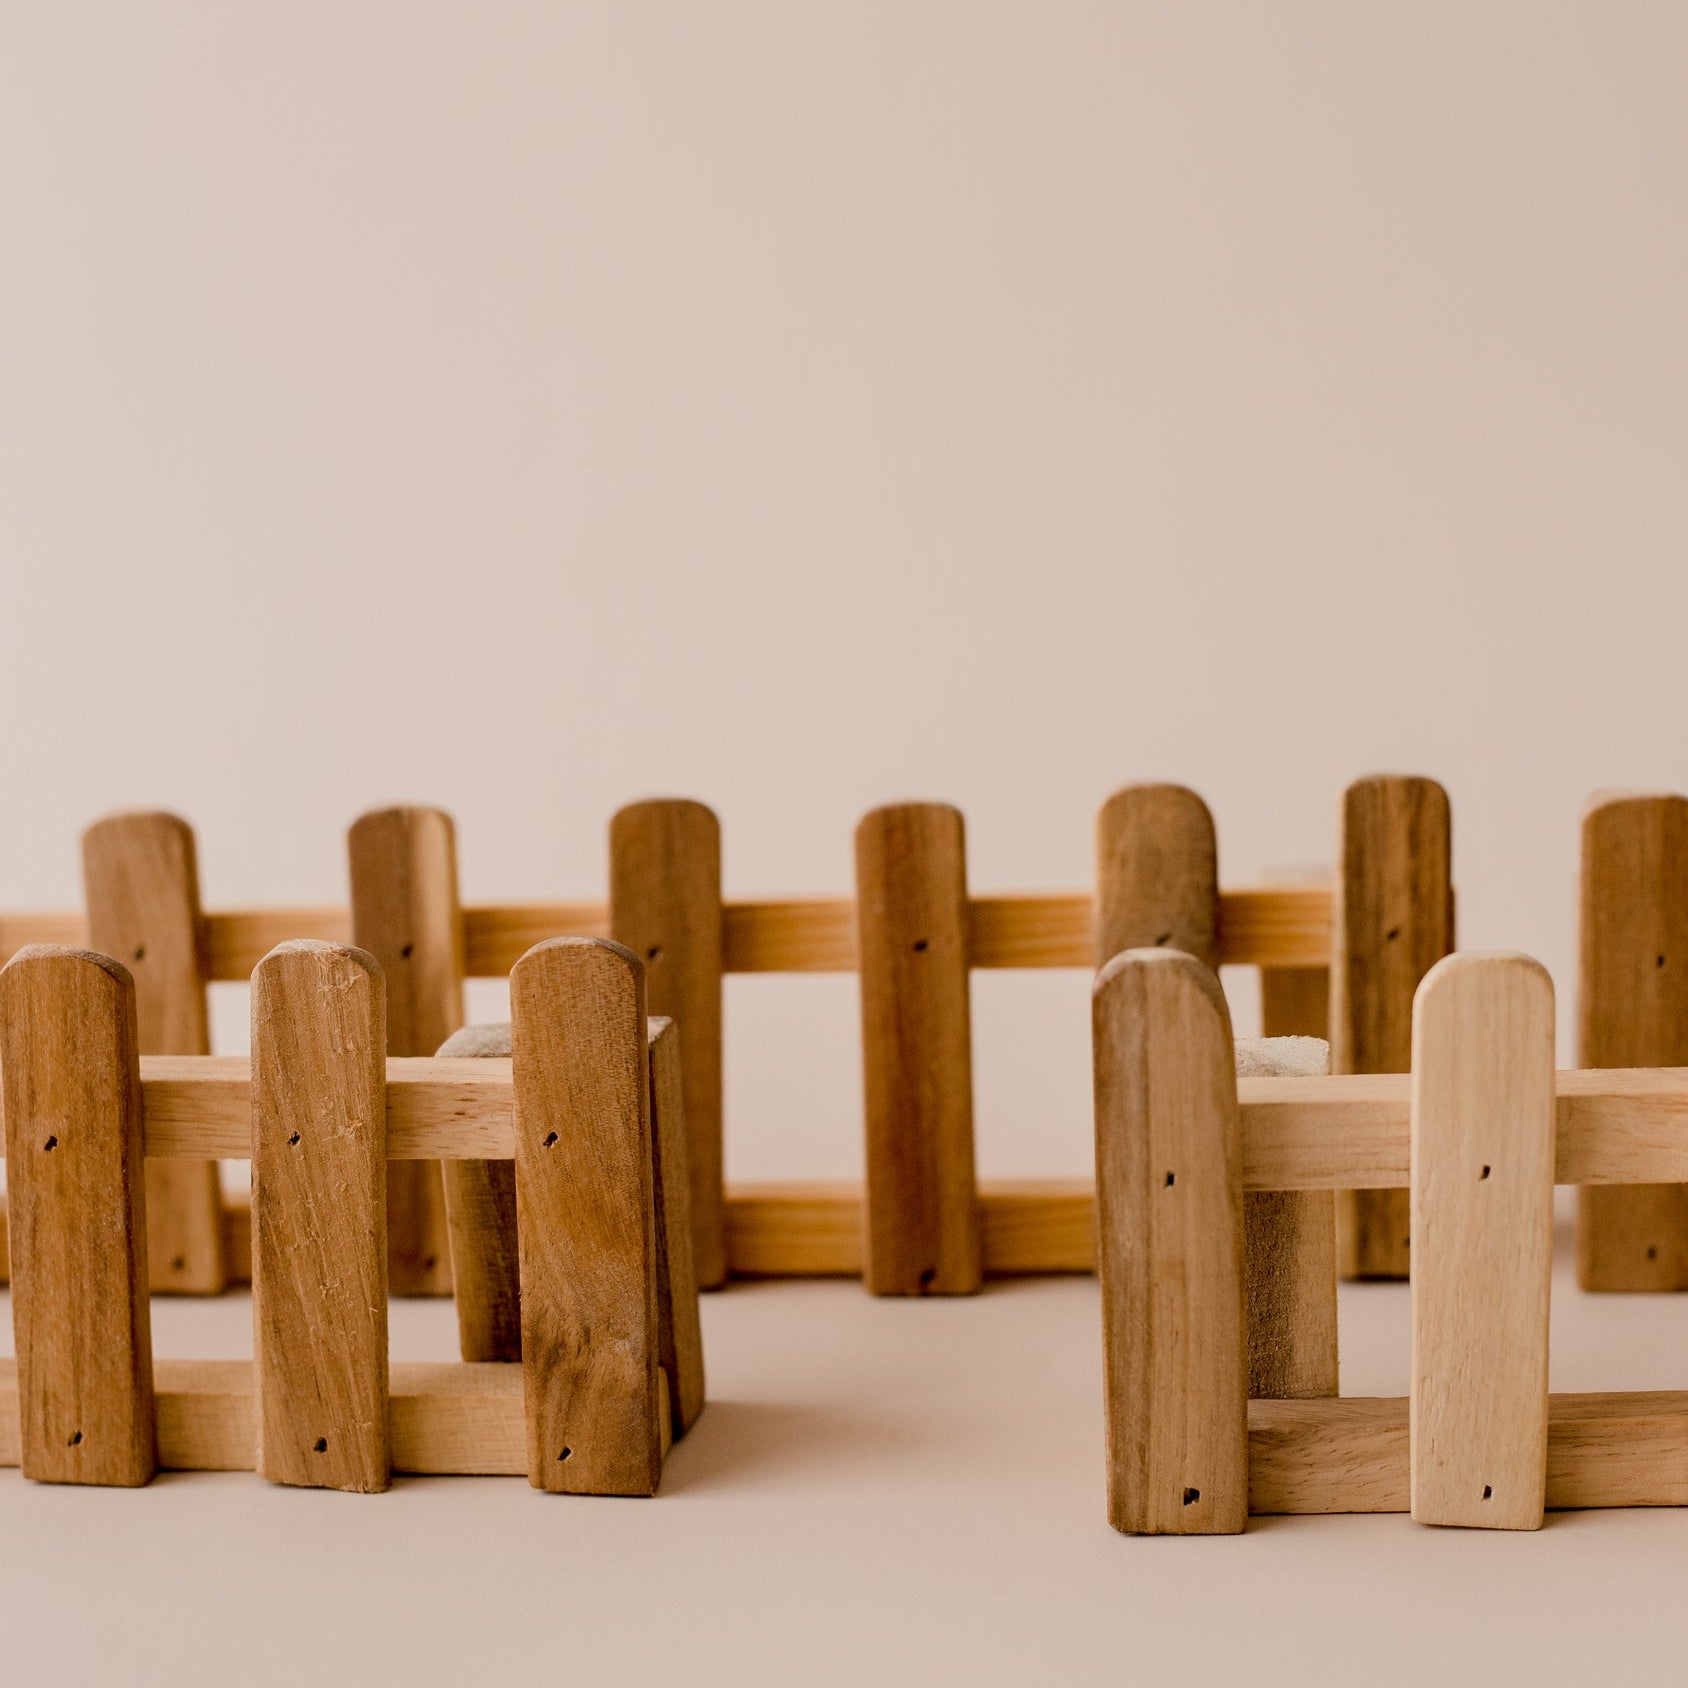 Wooden picket style fence from QToys